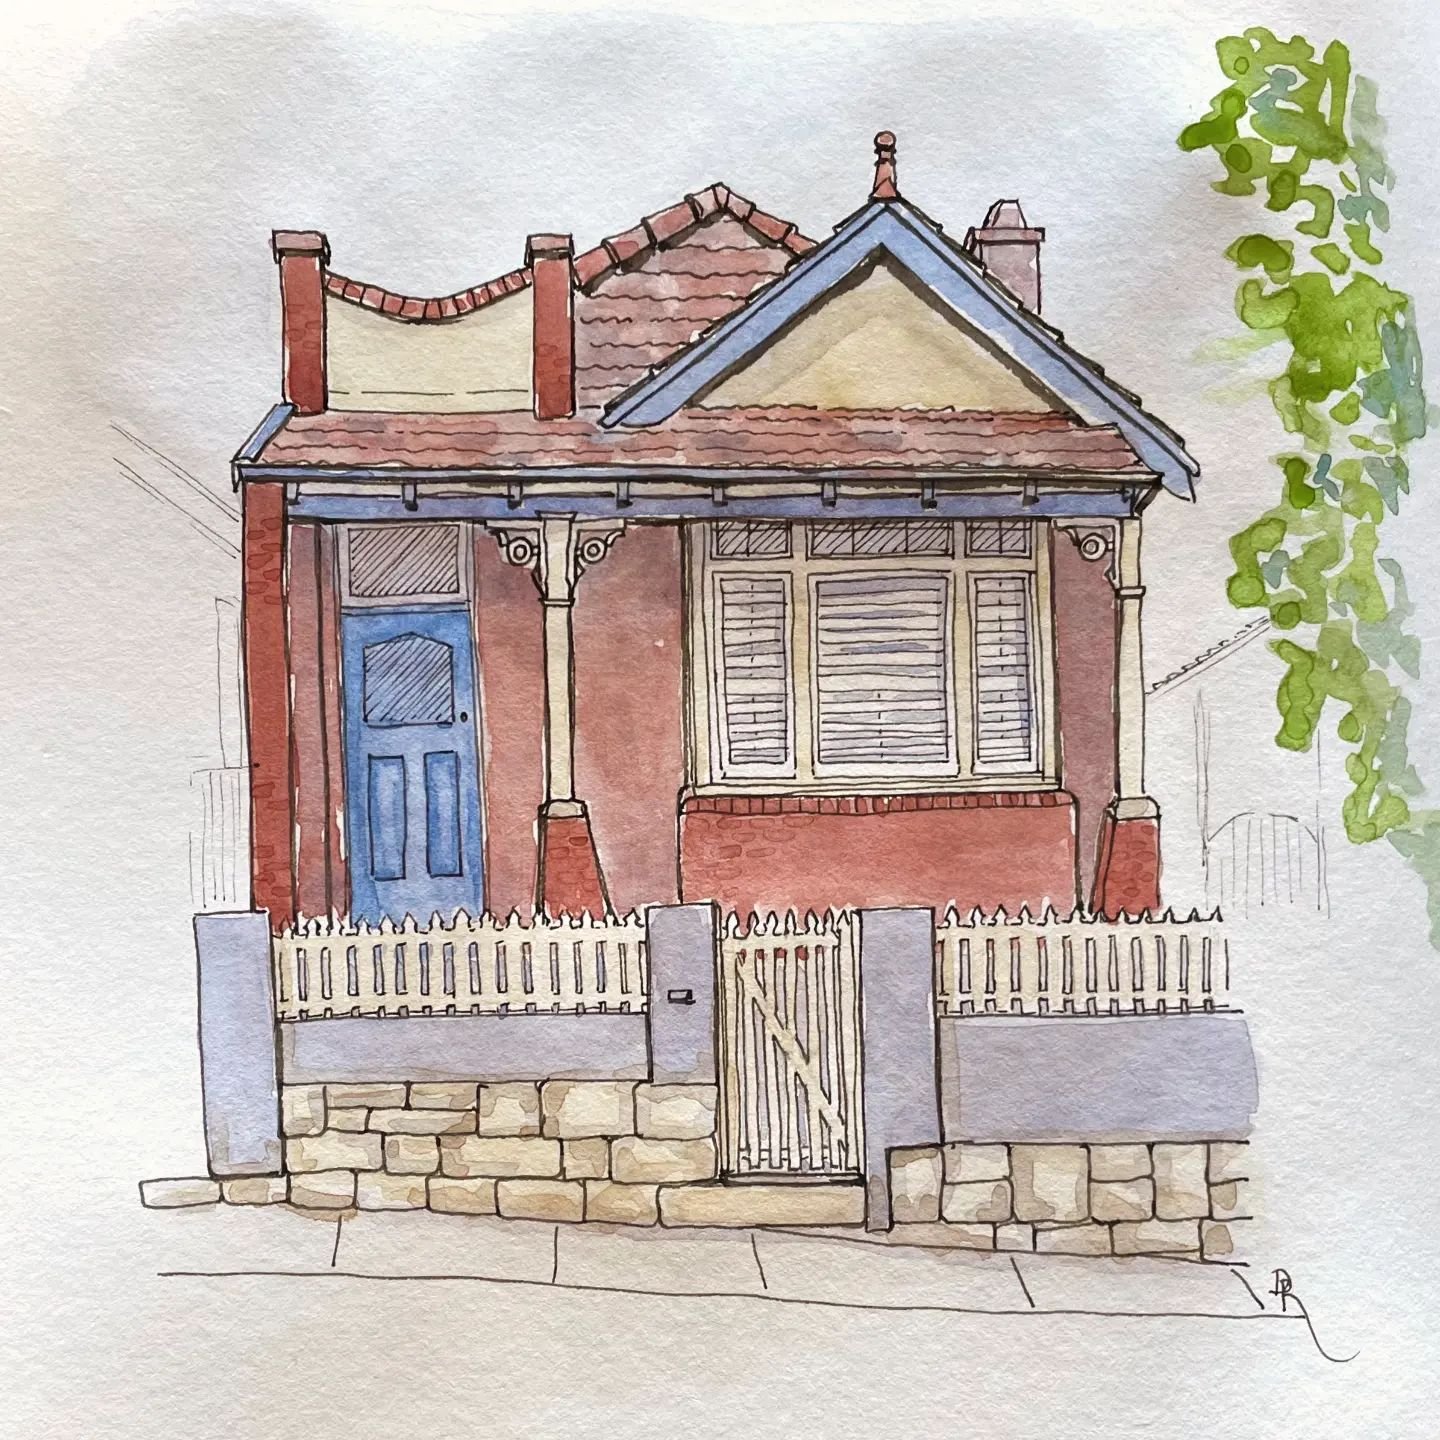 Now iss the time to book into the next ADA Urban Sketching event on Sunday May 19 at the Narrandera Memorial Gardens, Victoria Square, Narrandera. 
Start time is 9:30am through to 11:30am. 

The Narrandera Memorial Gardens are the location of the Han